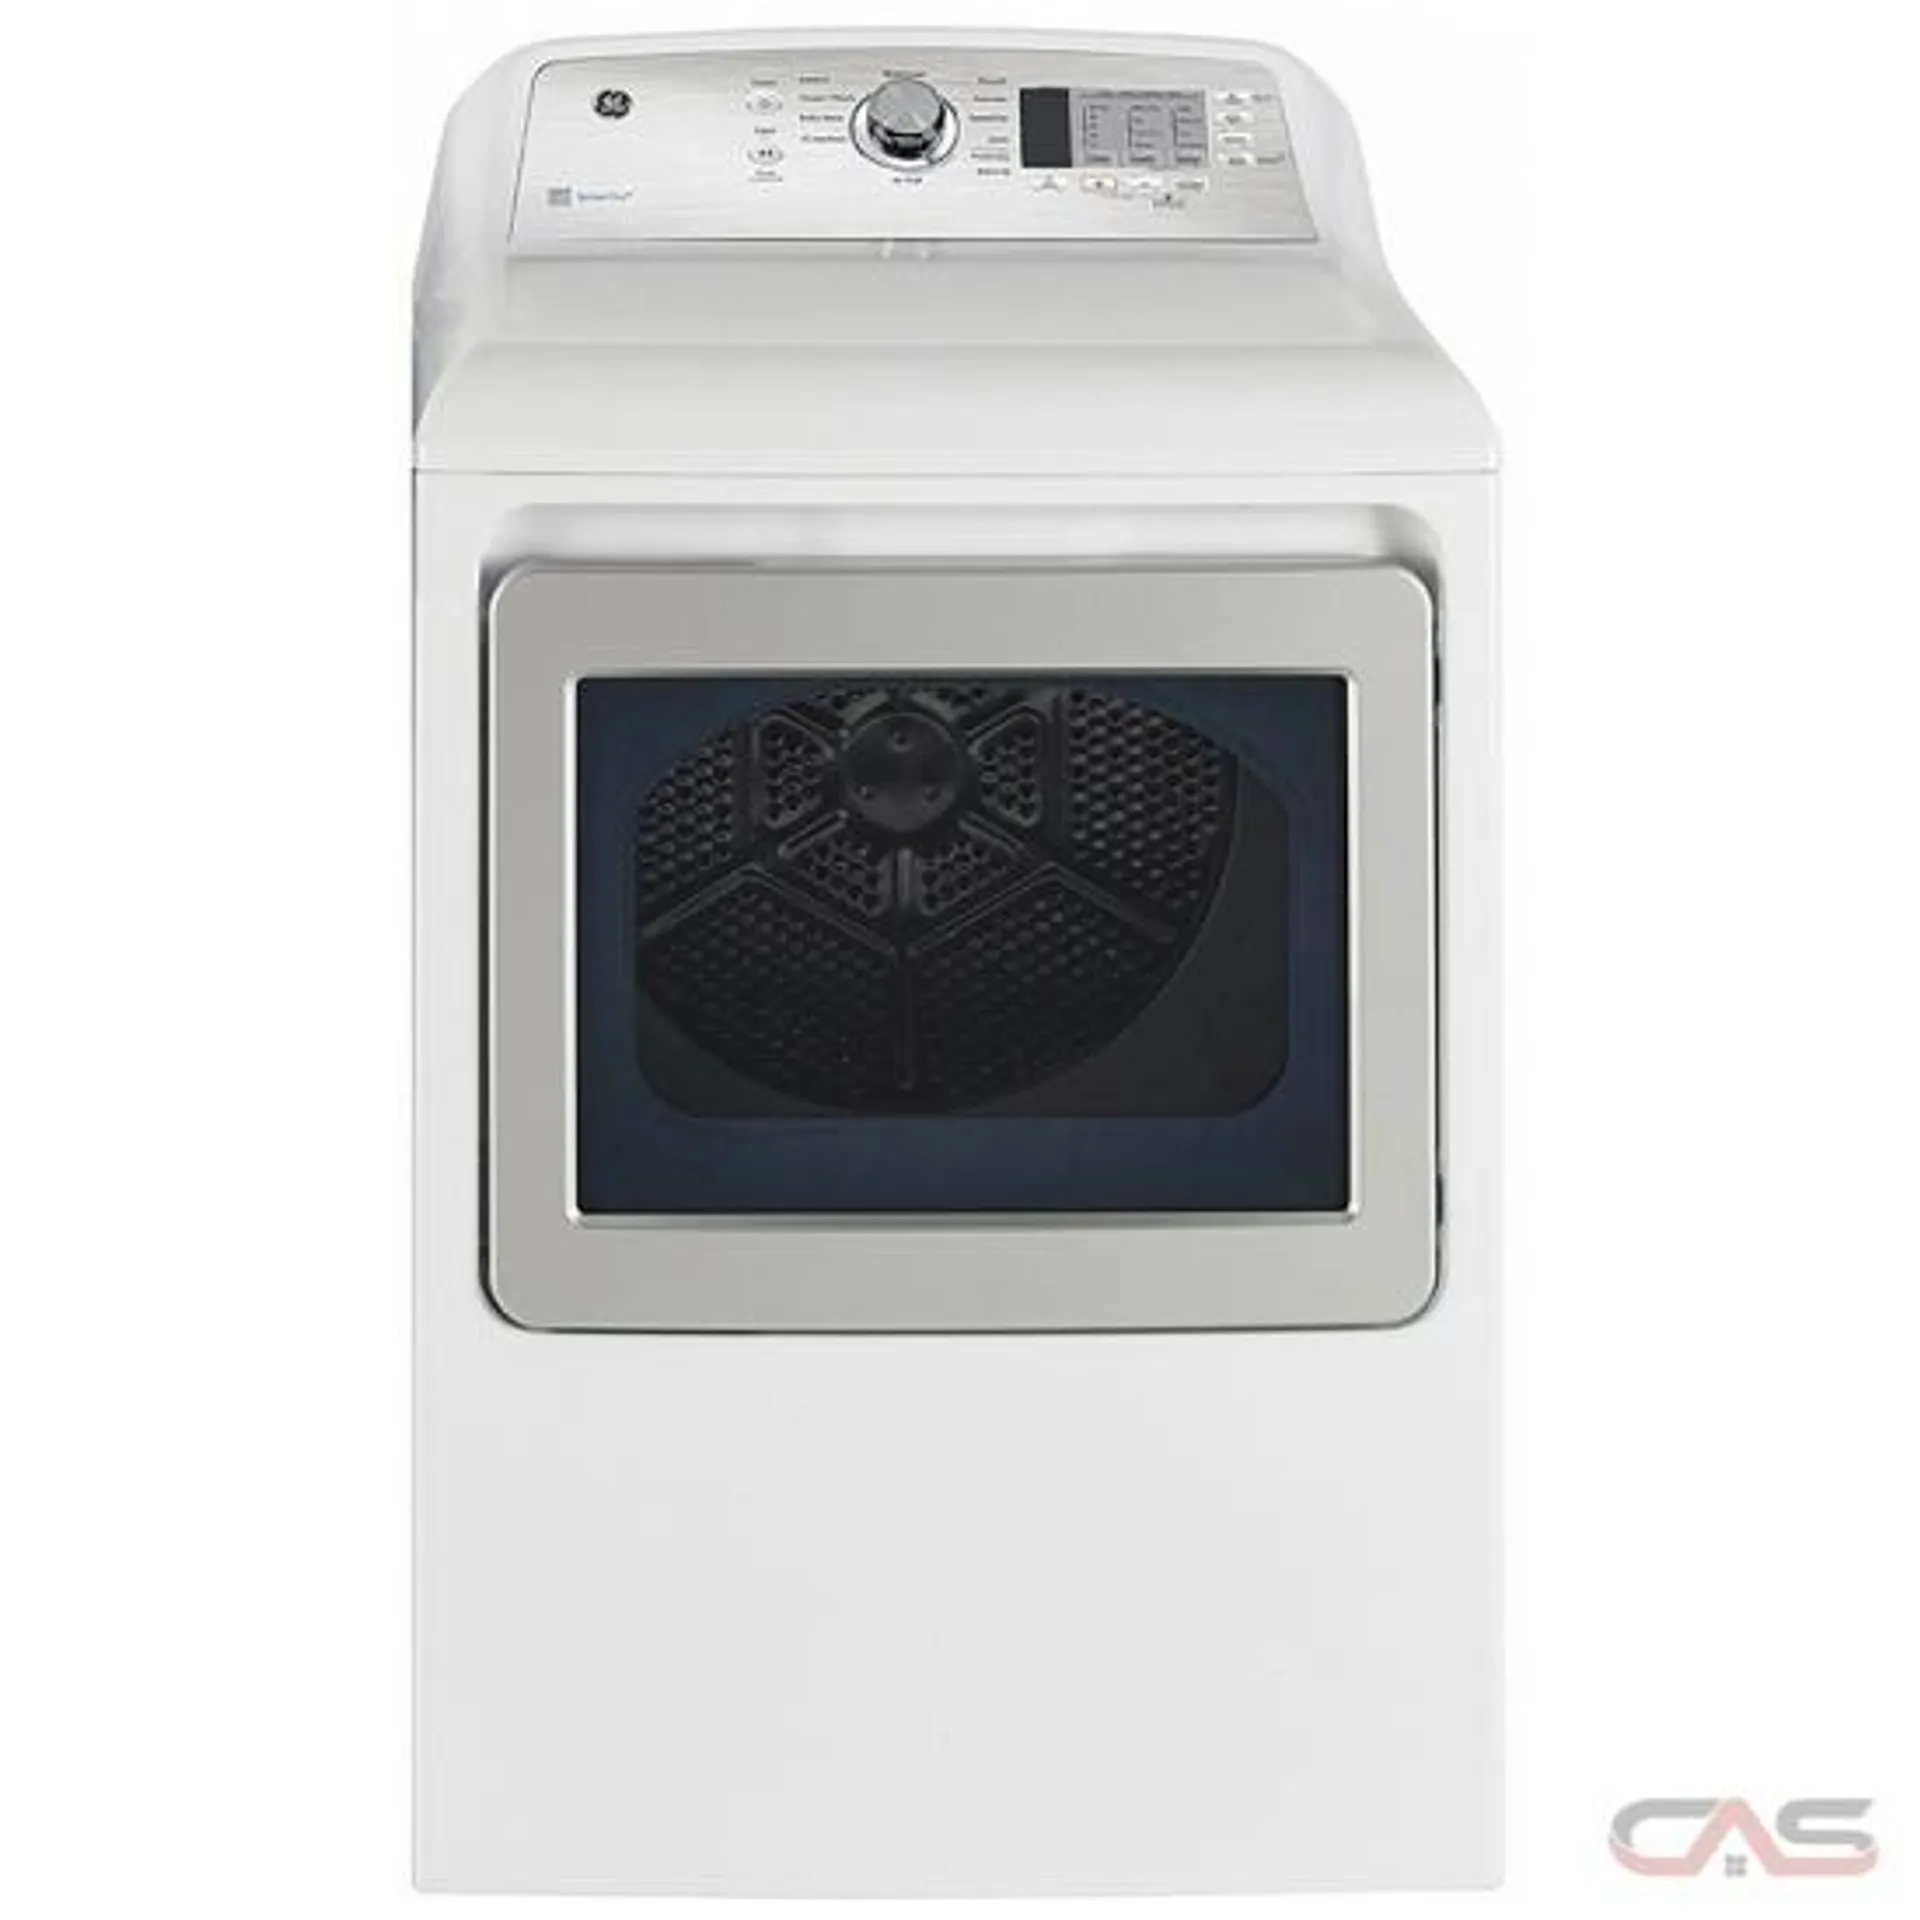 GE GTD65GBMRWS Dryer, 27 inch Width, Gas Dryer, 7.4 cu. ft. Capacity, 10 Dry Cycles, Steel Drum, White colour